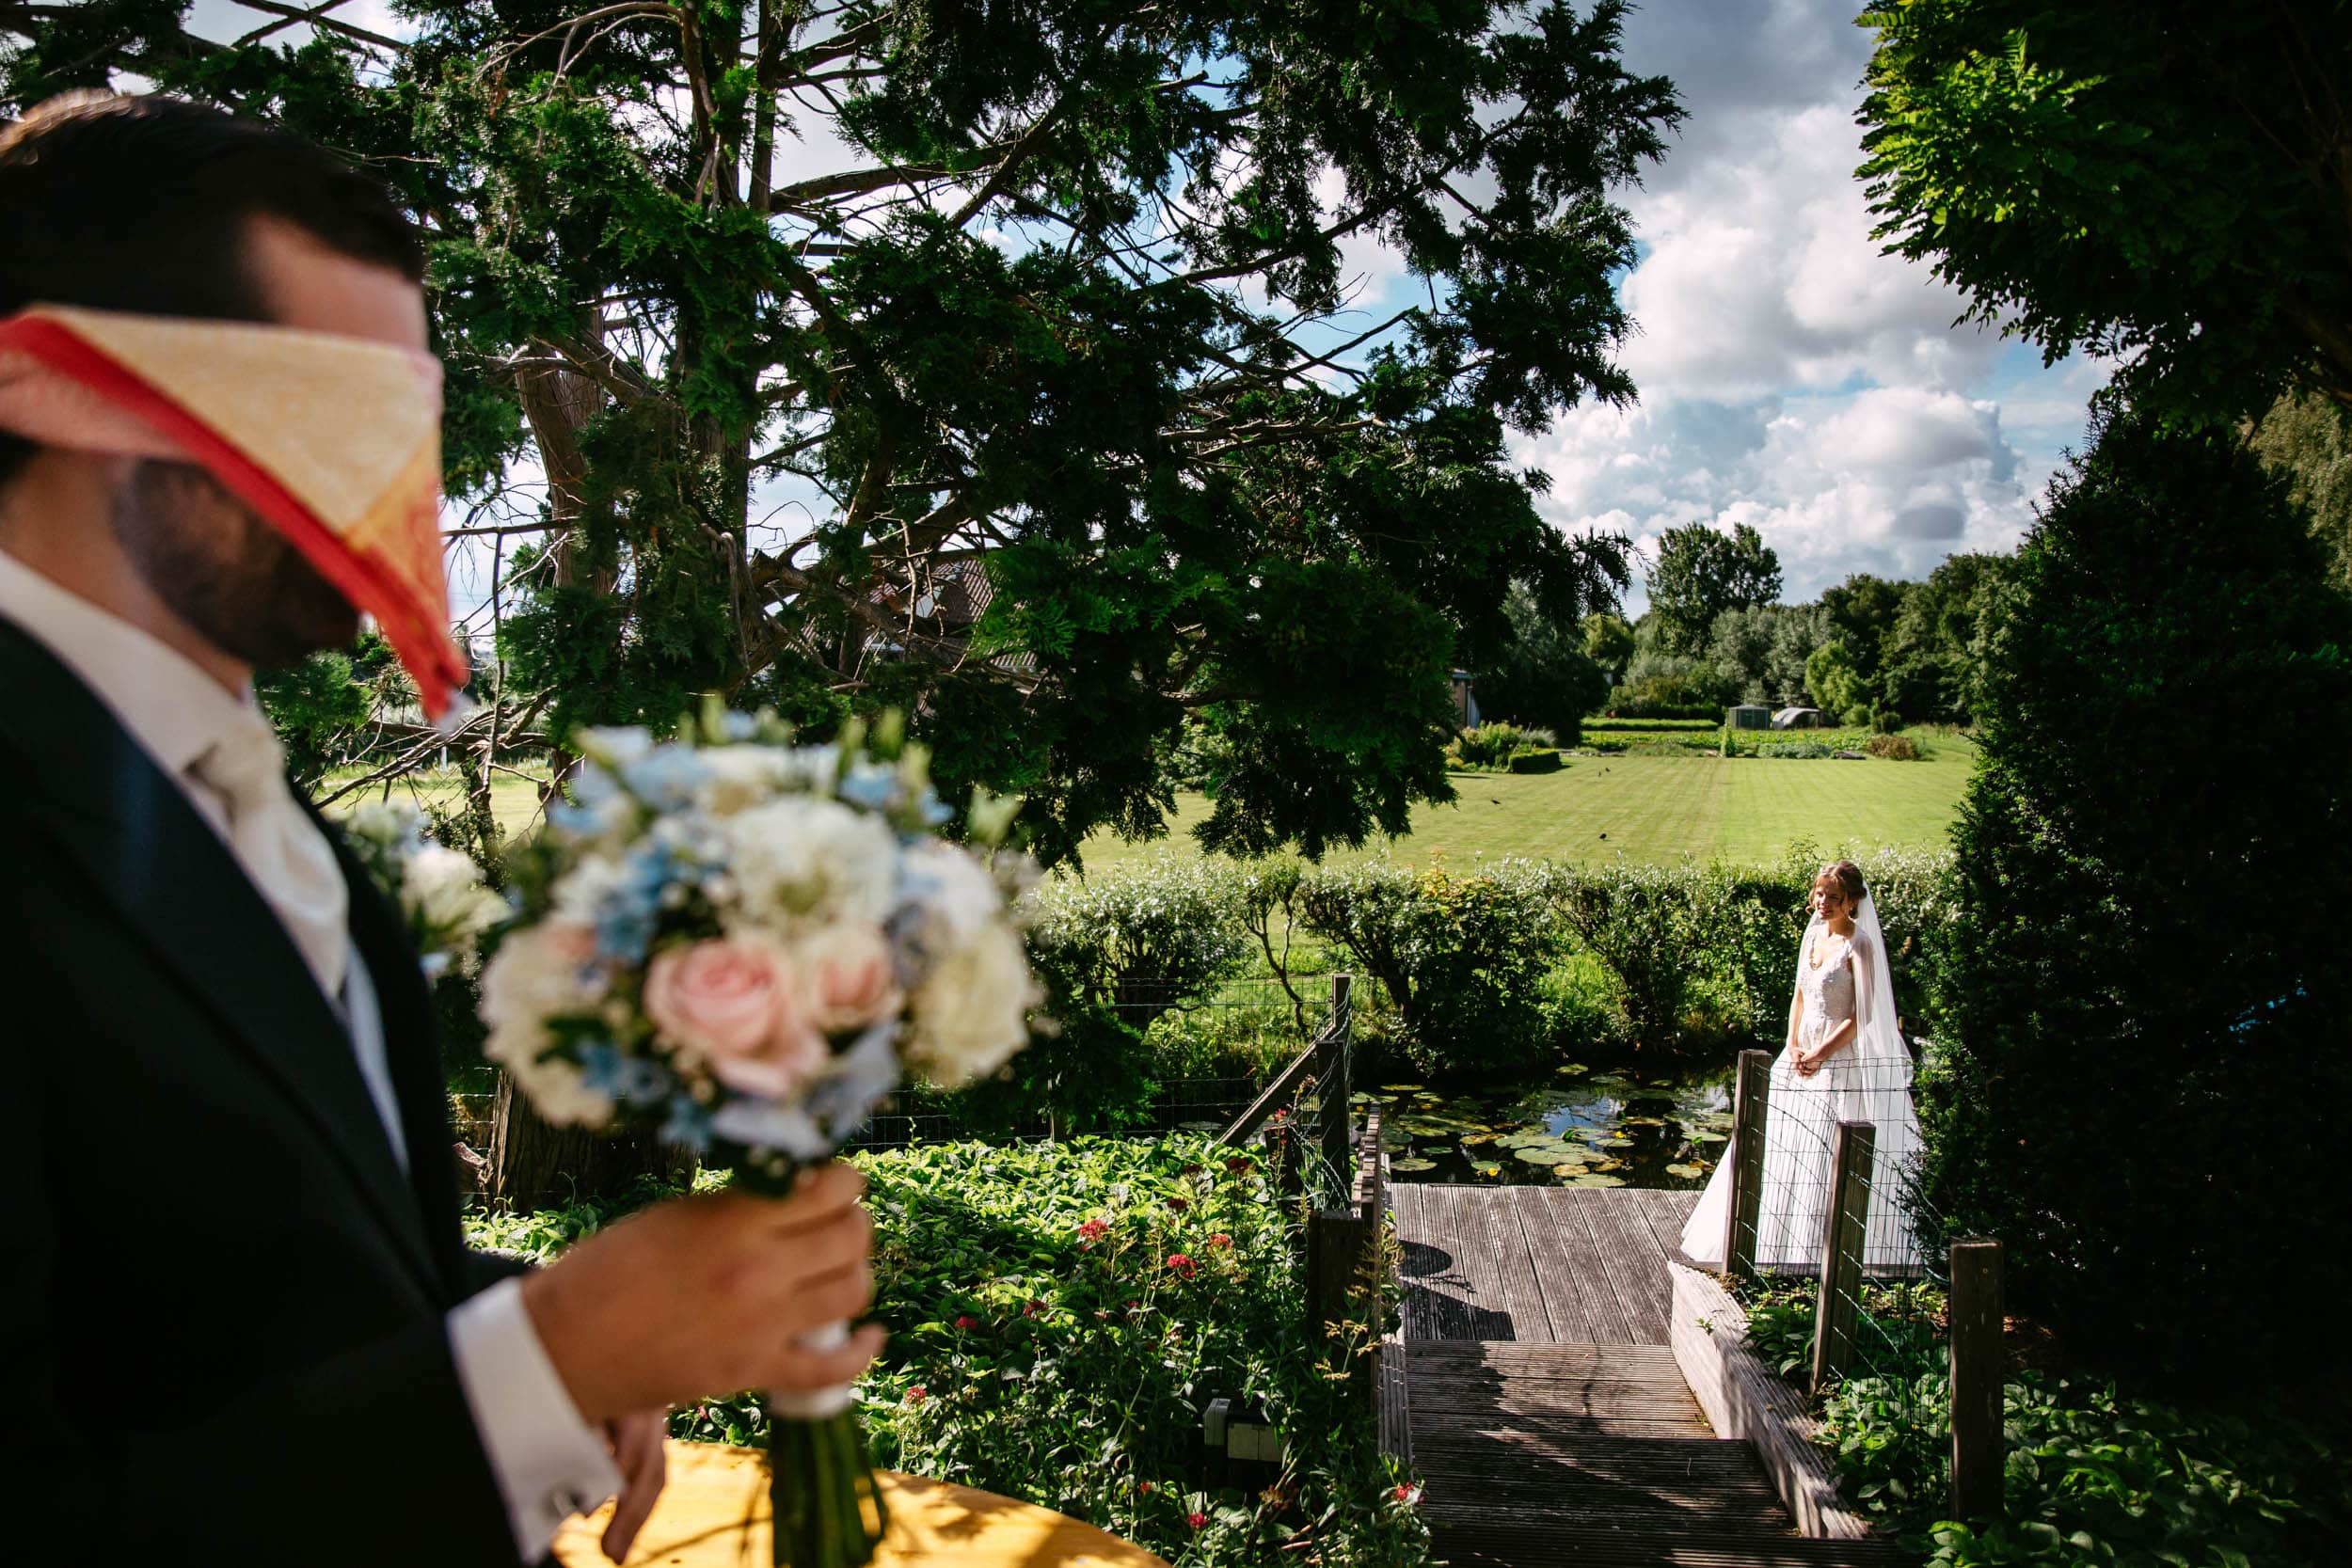 A bride and groom exchanging loving glances through a veil in their Wedding at the Delft Botanical Garden.